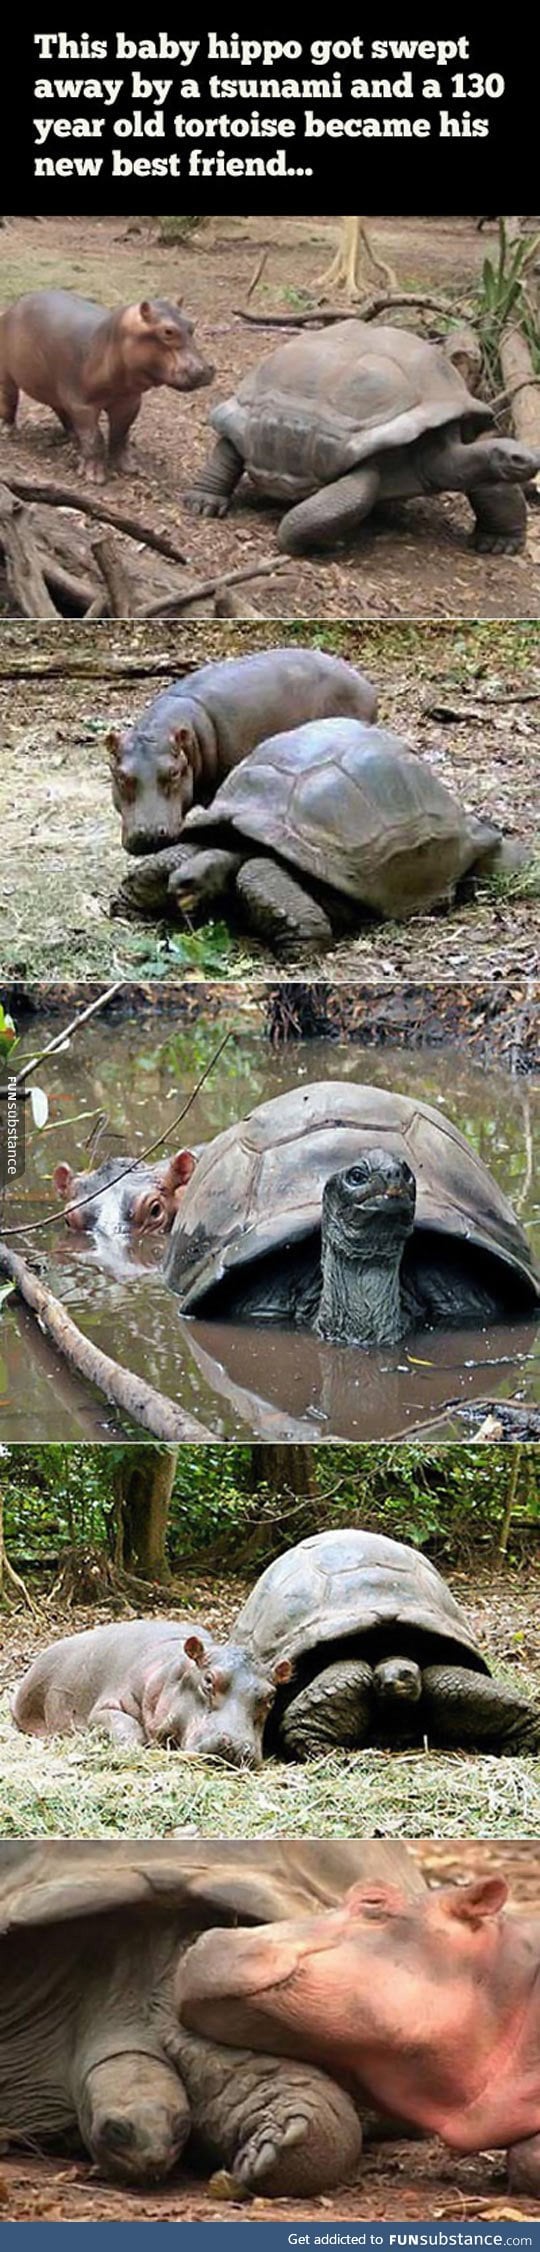 Baby hippo and 130 year old tortoise become friends